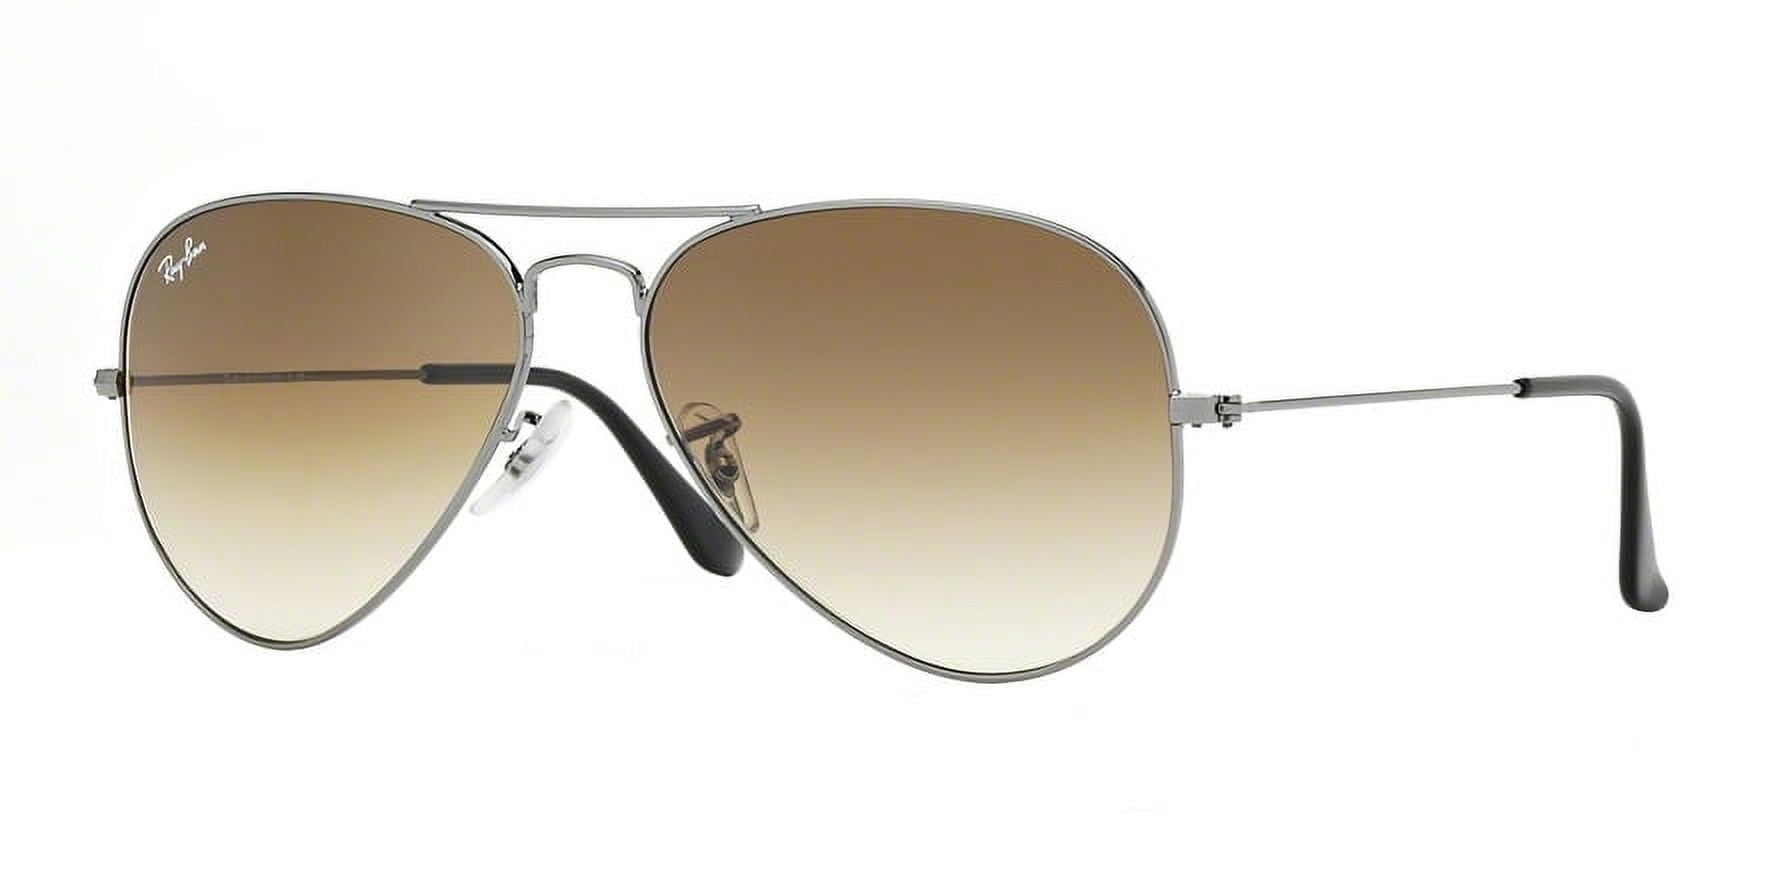 Ray-Ban RB3025 Aviator Large Metal Sunglasses - Size - 62 (Crystal Brown  Gradient)